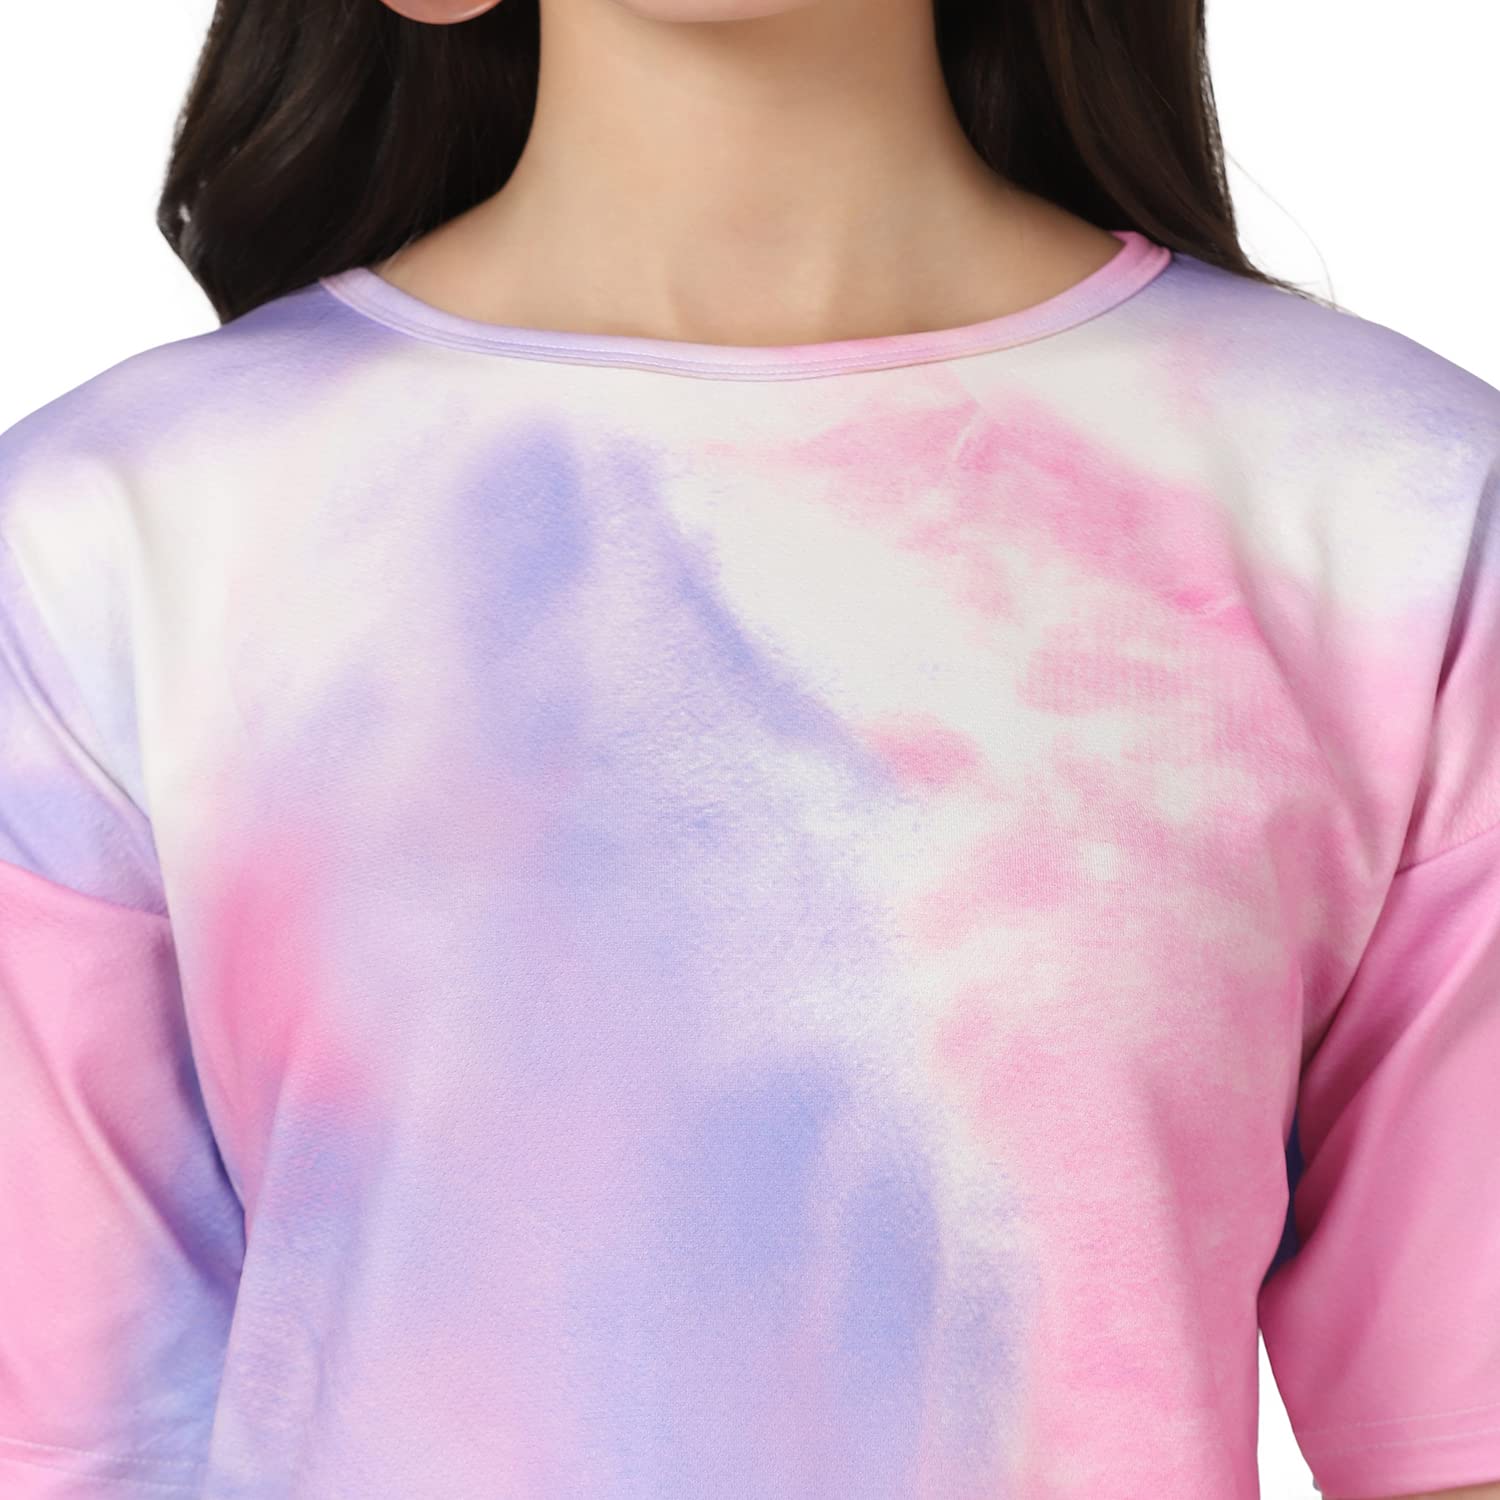 GRECIILOOKS T-Shirt for Women - Cotton Blend Tie-Dye Drop Shoulder Long Tops with Baggy T-Shirt for Girls Suitable for Sports,Gym, Workout, Yoga,Tracking, Casual Wear (Pack of 1) -  Women's T-Shirts in Sri Lanka from Arcade Online Shopping - Just Rs. 3278!